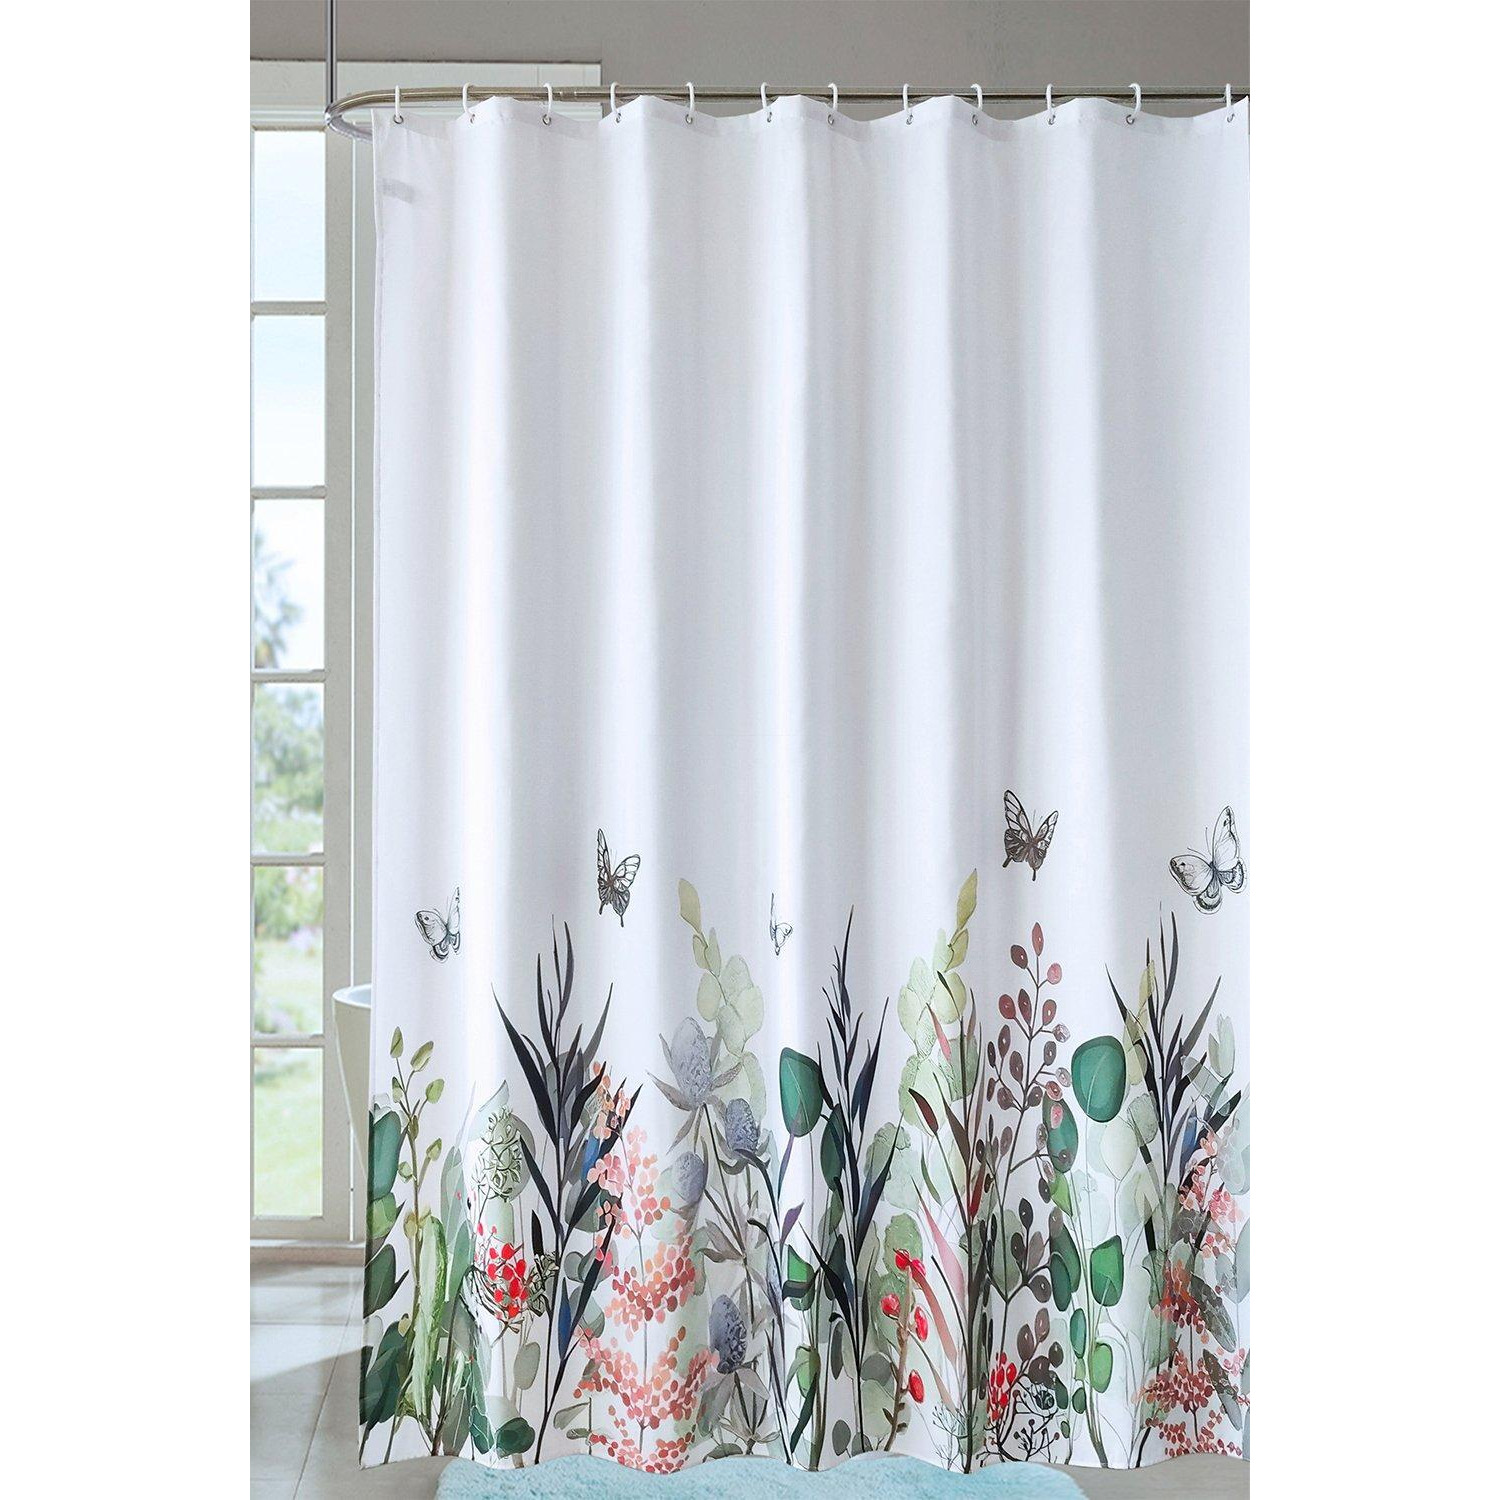 Butterfly Flowered Plant Wildflower Shower Curtain - 180cm x 200cm - image 1